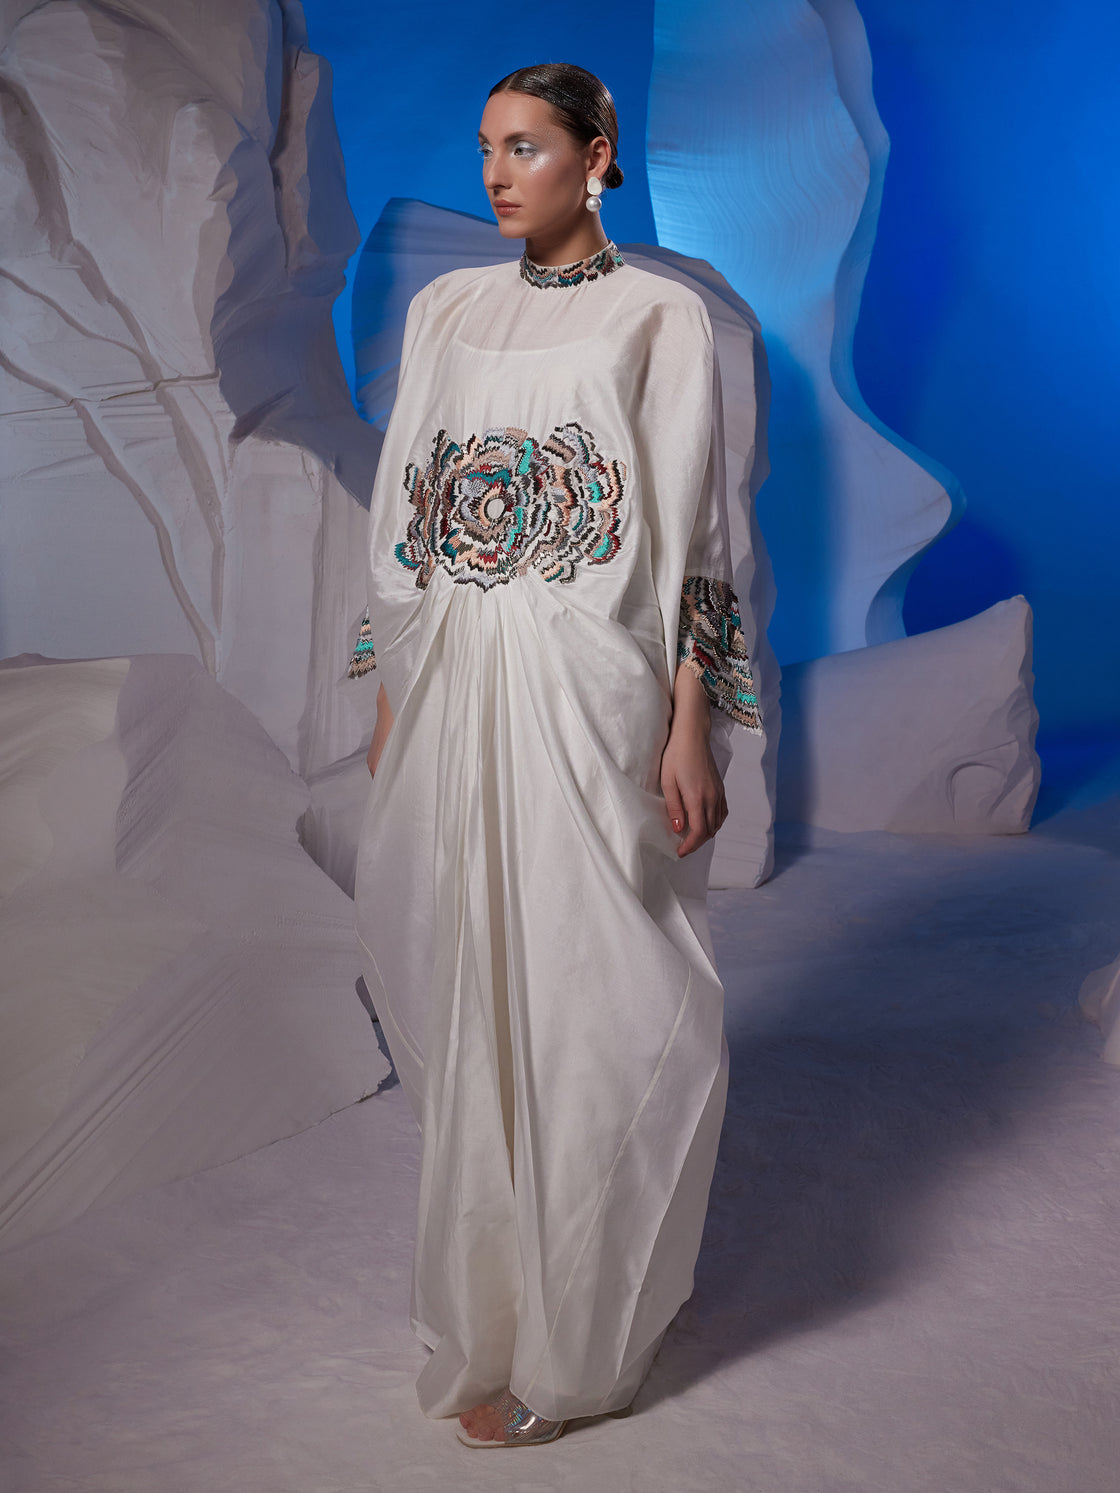 Cowl dress adorned with vibrant embroidery